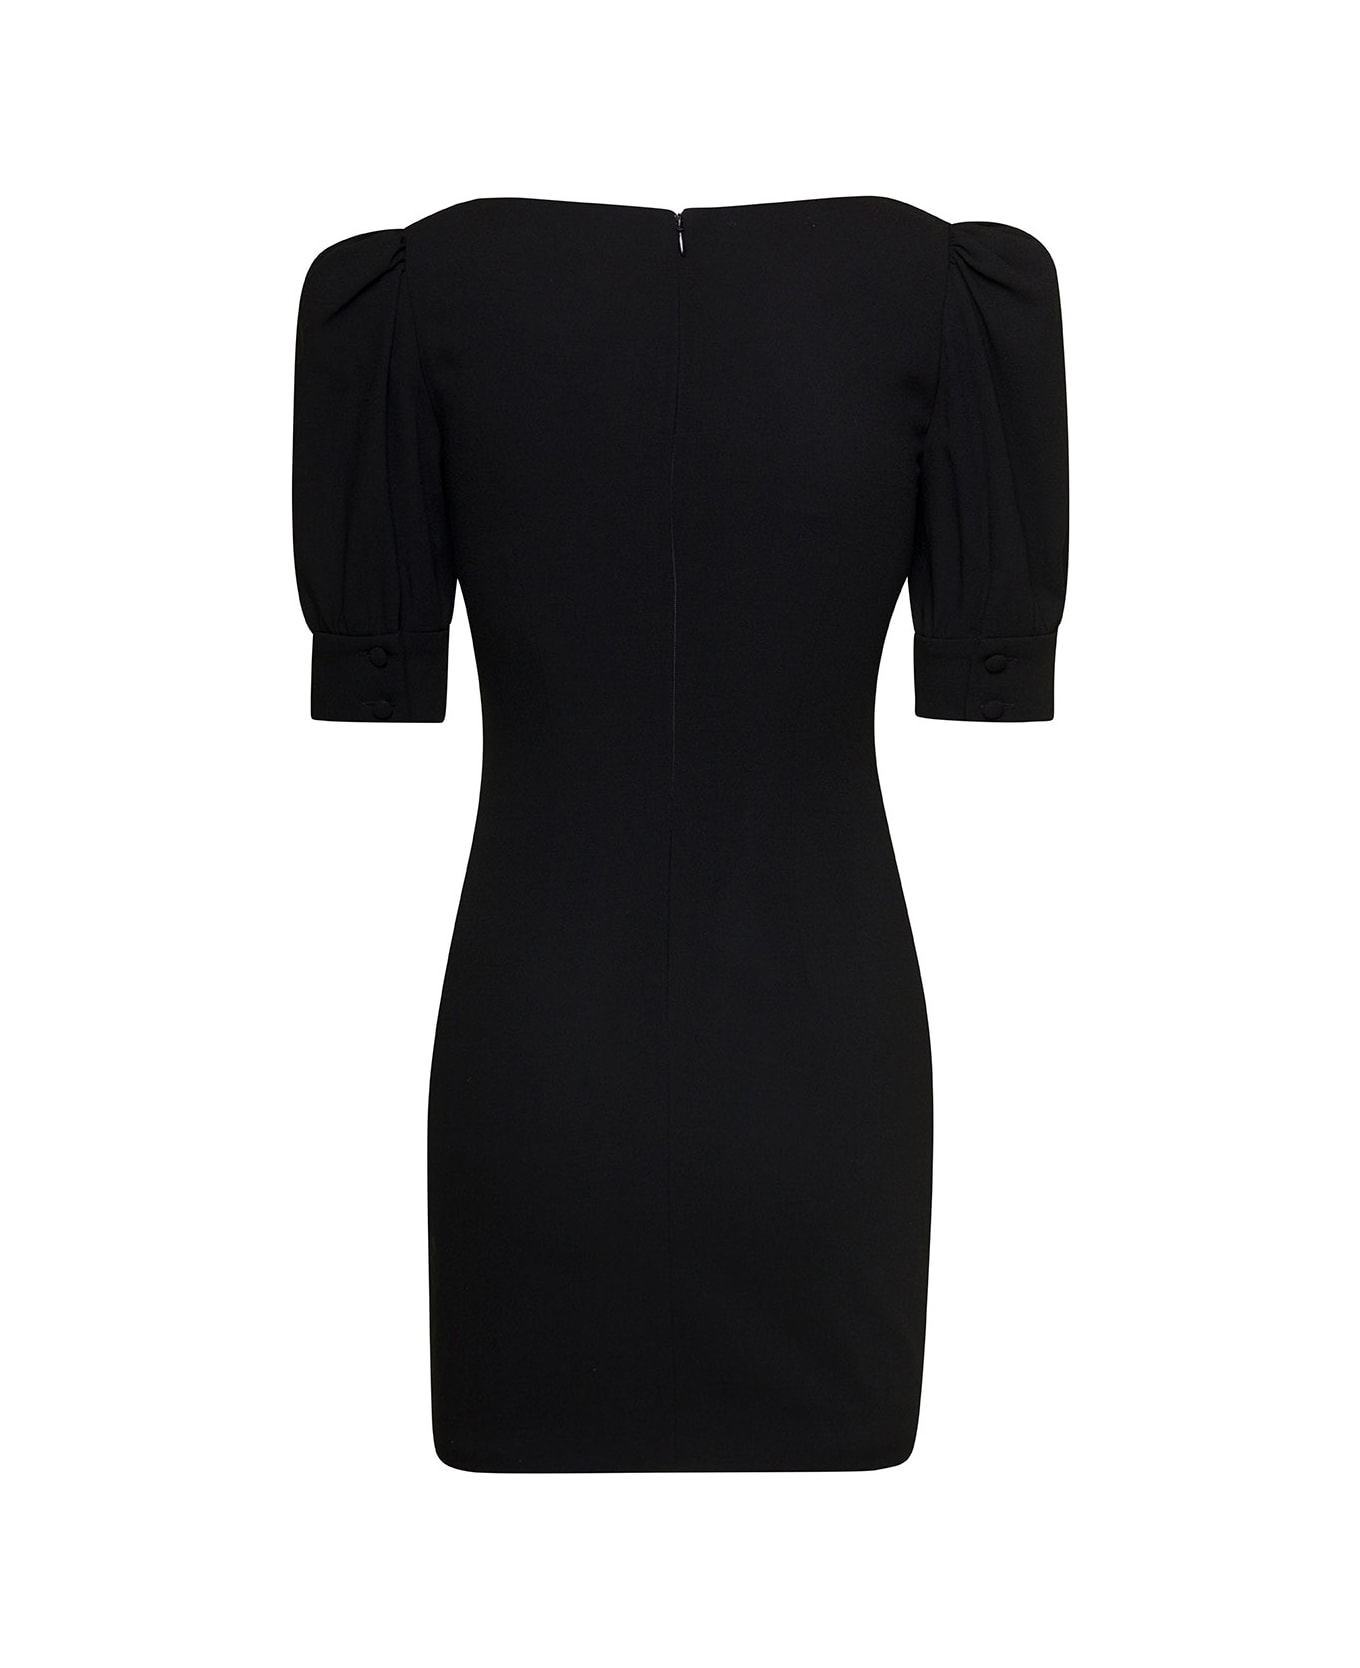 Alessandra Rich Black Mini Dress With Lace Detail On The Front In Wool Woman - Black ワンピース＆ドレス